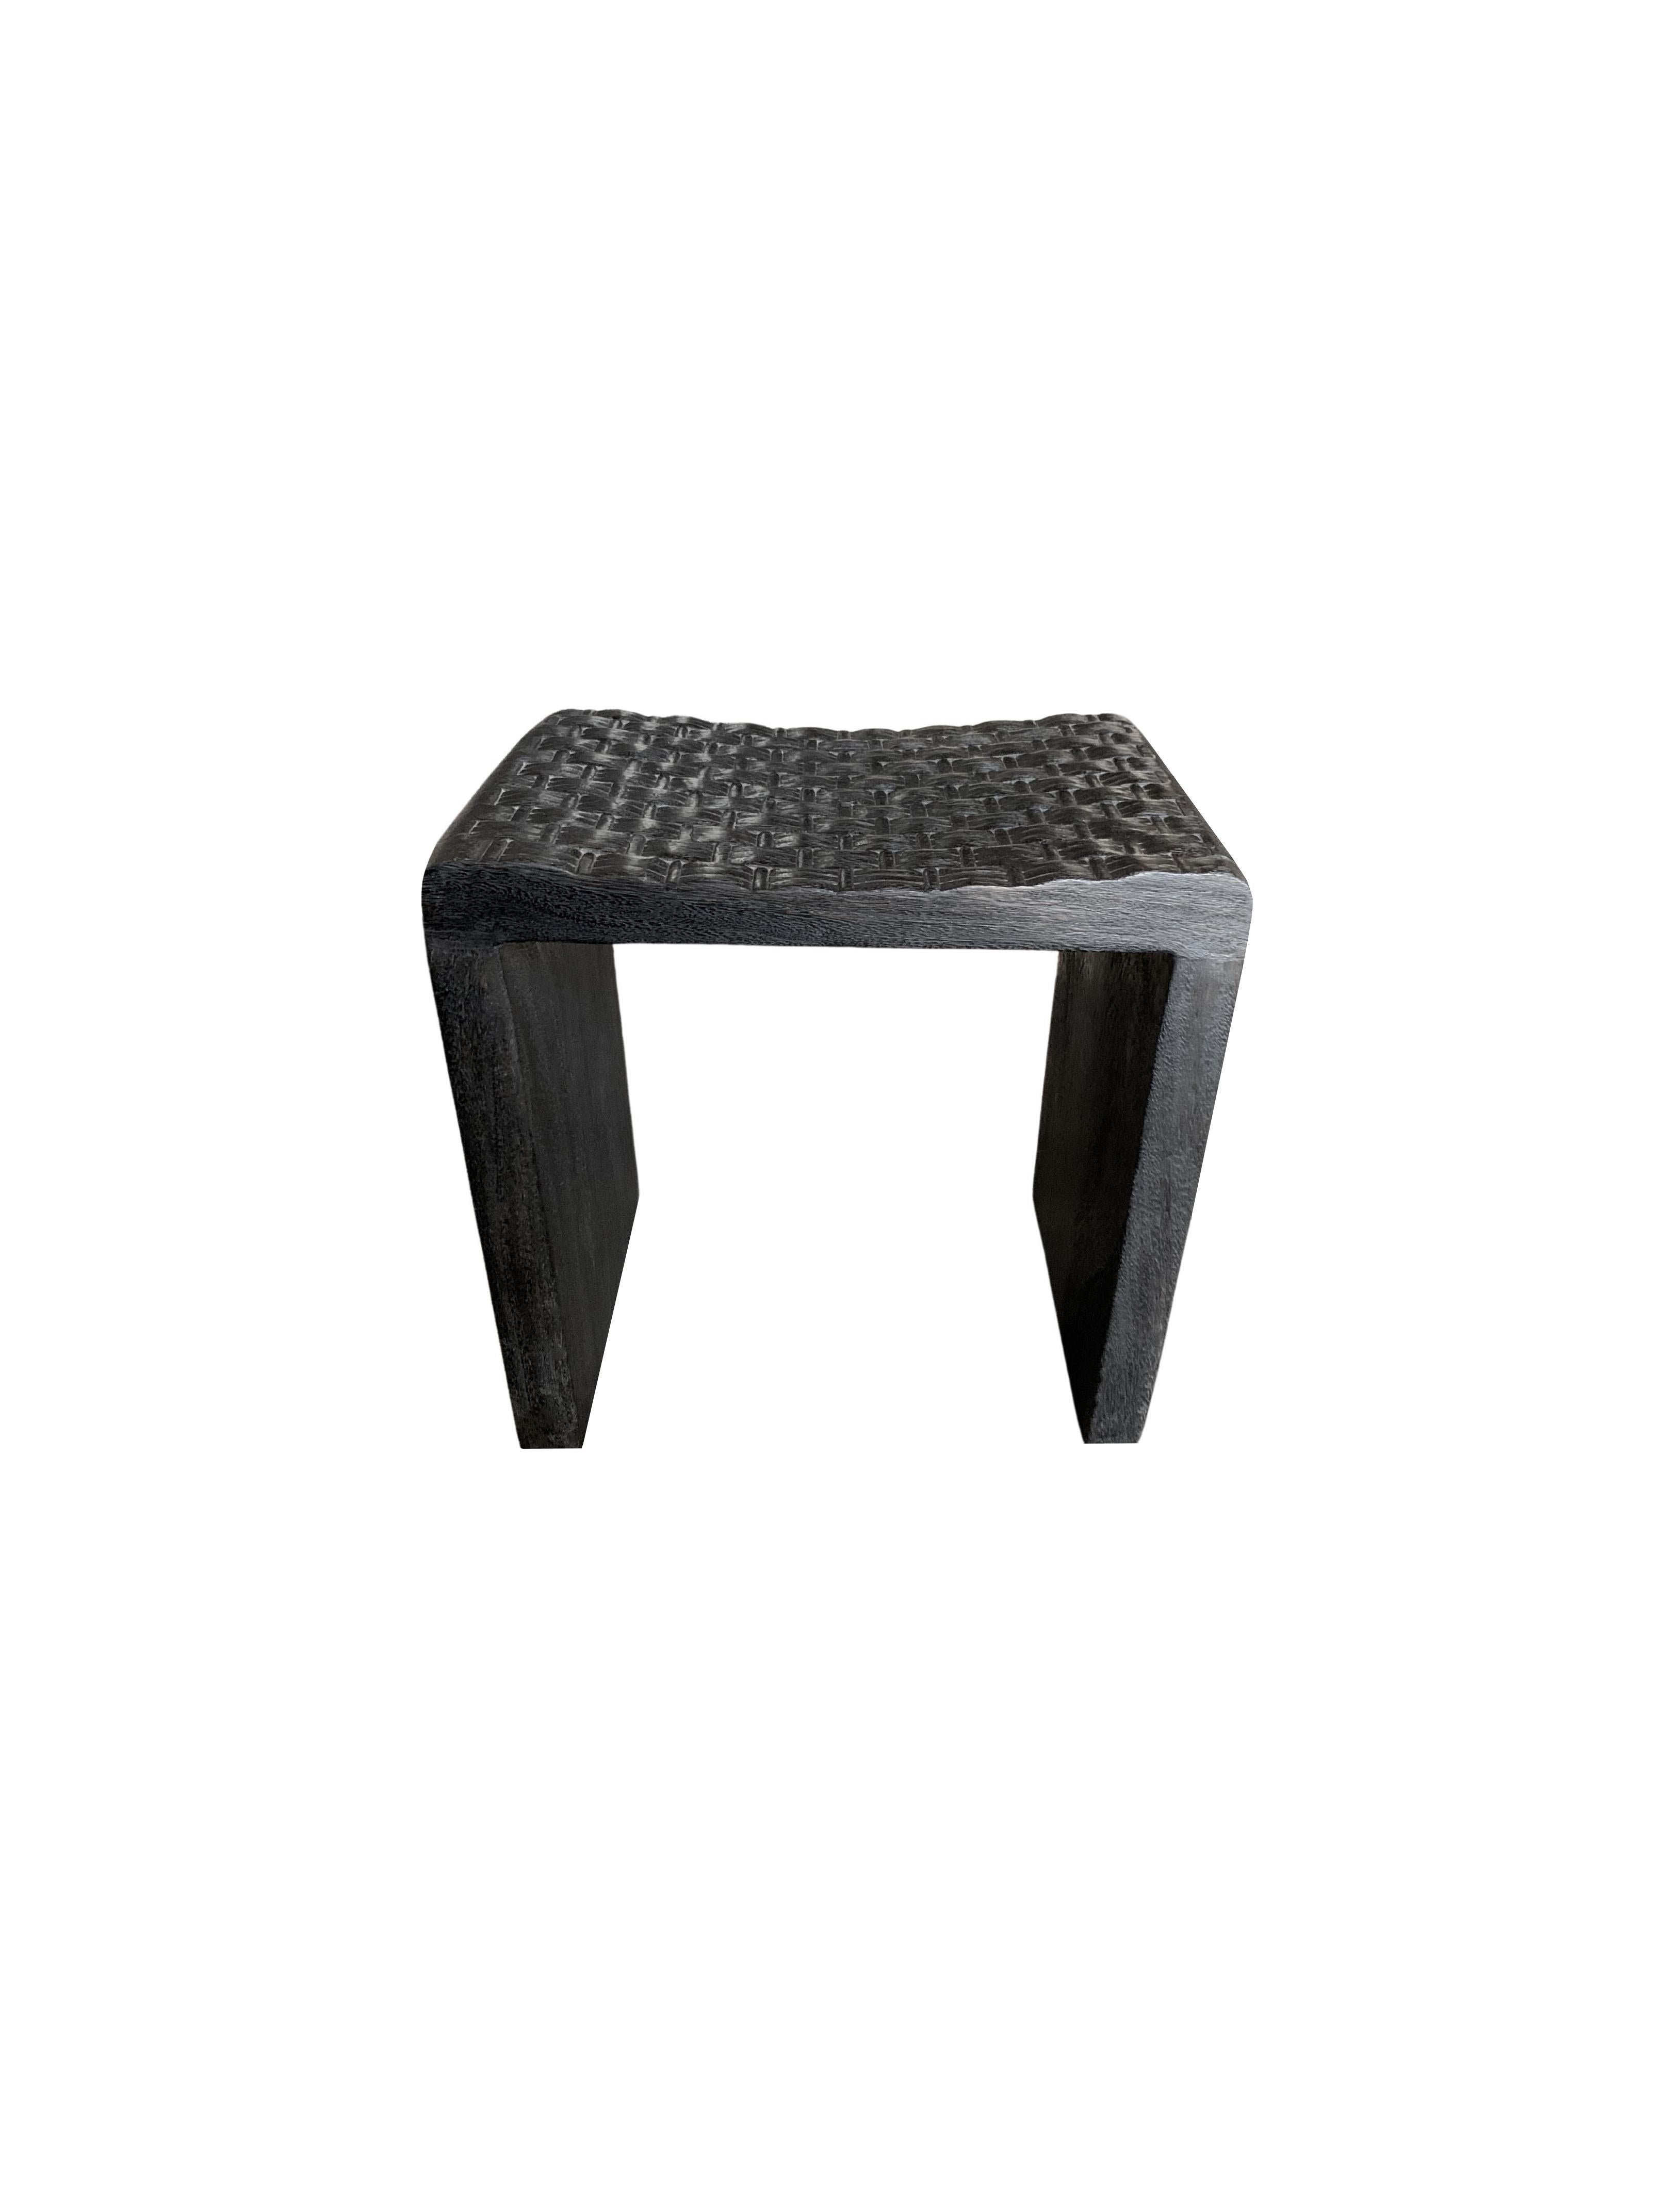 This wonderfully sculptural stool was crafted using mango wood. Its neutral pigment makes it perfect for any space. A uniquely sculptural and versatile piece. Unique to this chair is the carved seat, which features carved detailing meant to resemble